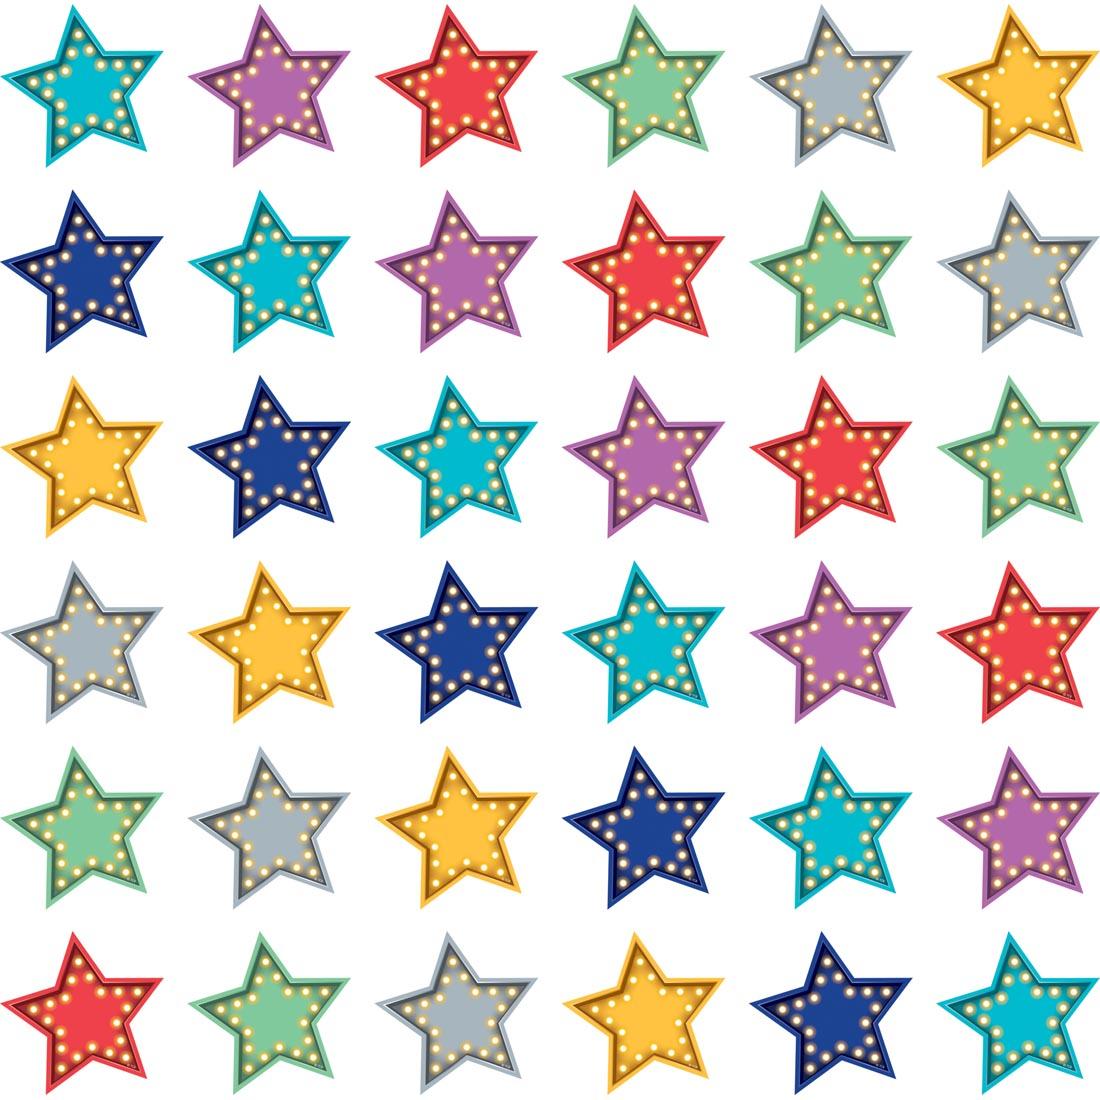 Stars Mini Accents from the Marquee collection by Teacher Created Resources